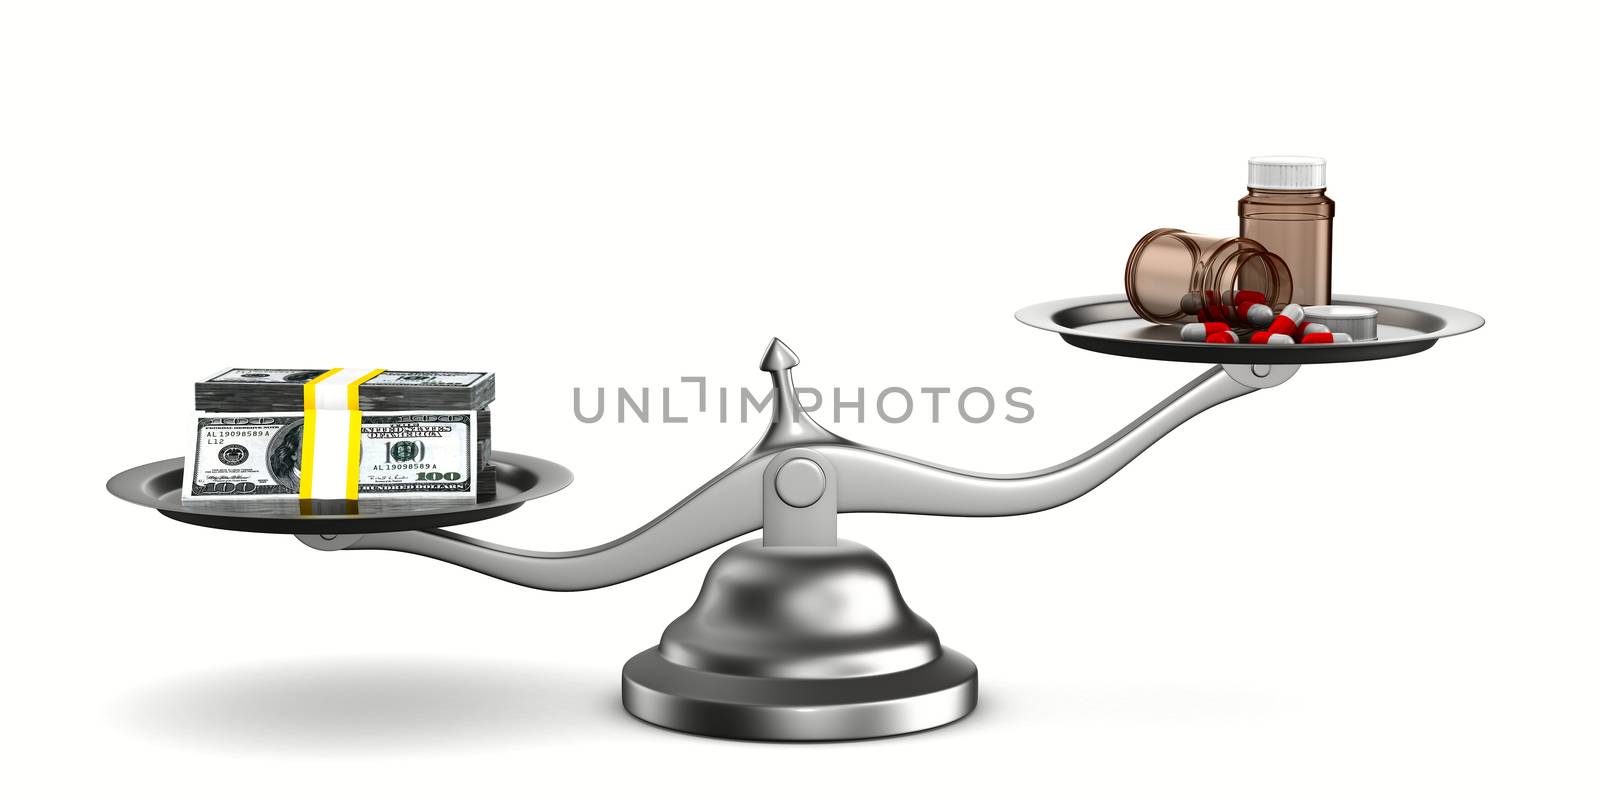 Medicines and money on scales. Isolated 3D image